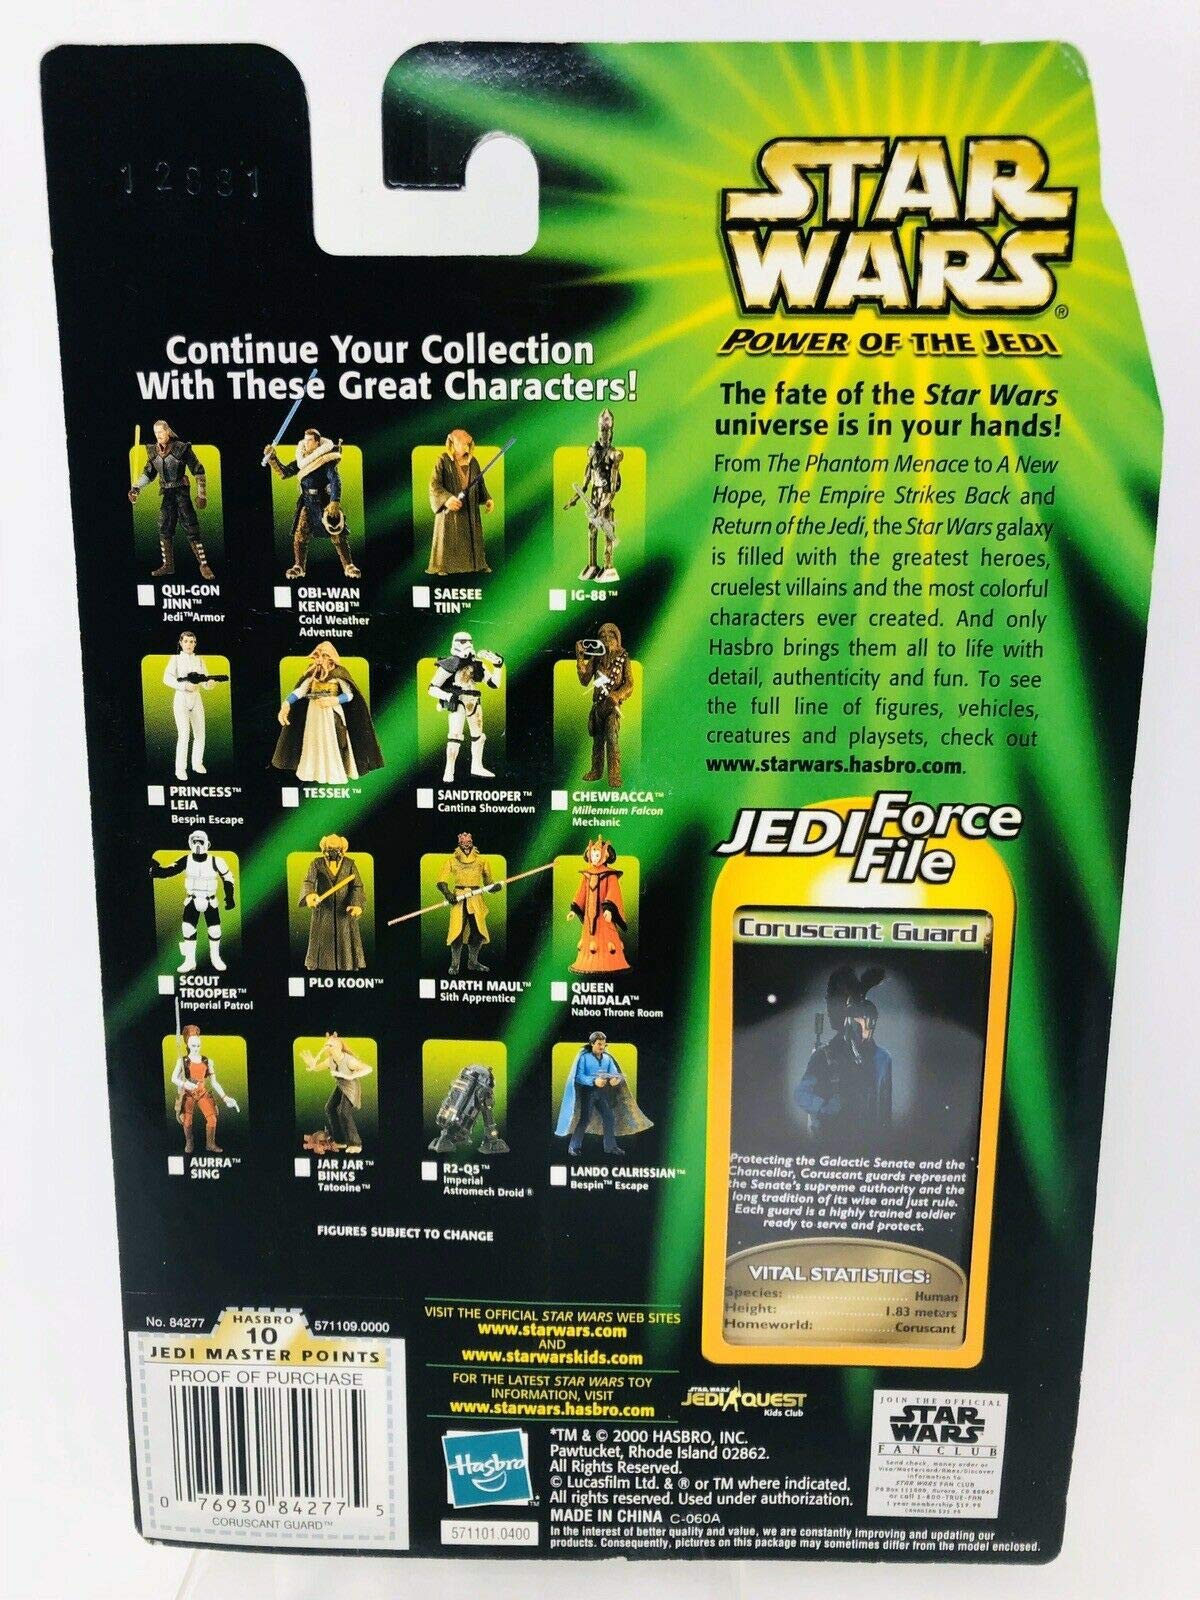 Vintage 2000 Star Wars Power Of The Jedi Coruscant Guard Action Figure - Brand New Factory Sealed Shop Stock Room Find